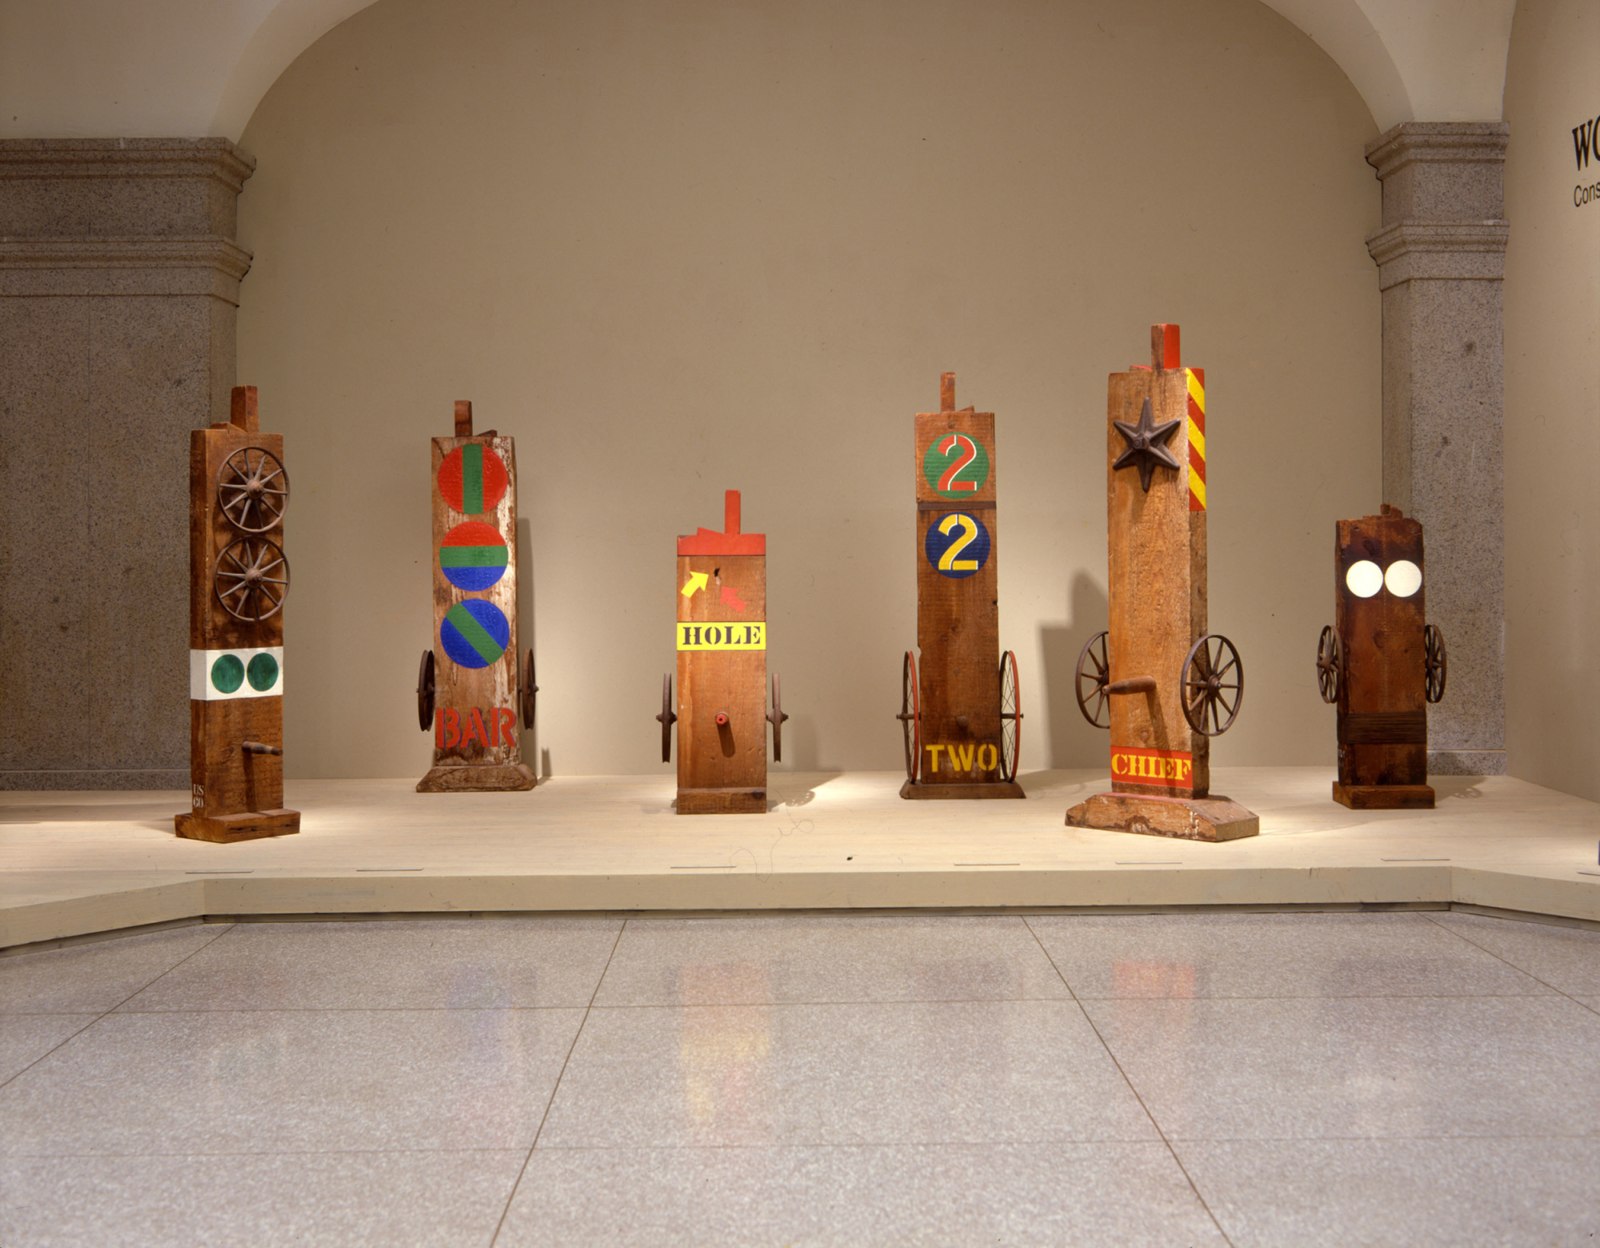 Installation view of Robert Indiana: Wood Works, National Museum of American Art, Washington, D.C., May 1&amp;ndash;September 3, 1984; left to right: Ge (1960), Bar (1960), Hole (1960), Two (1962), Chief (1962), and Virgin (1960) . Photograph Archives, Smithsonian American Art Museum